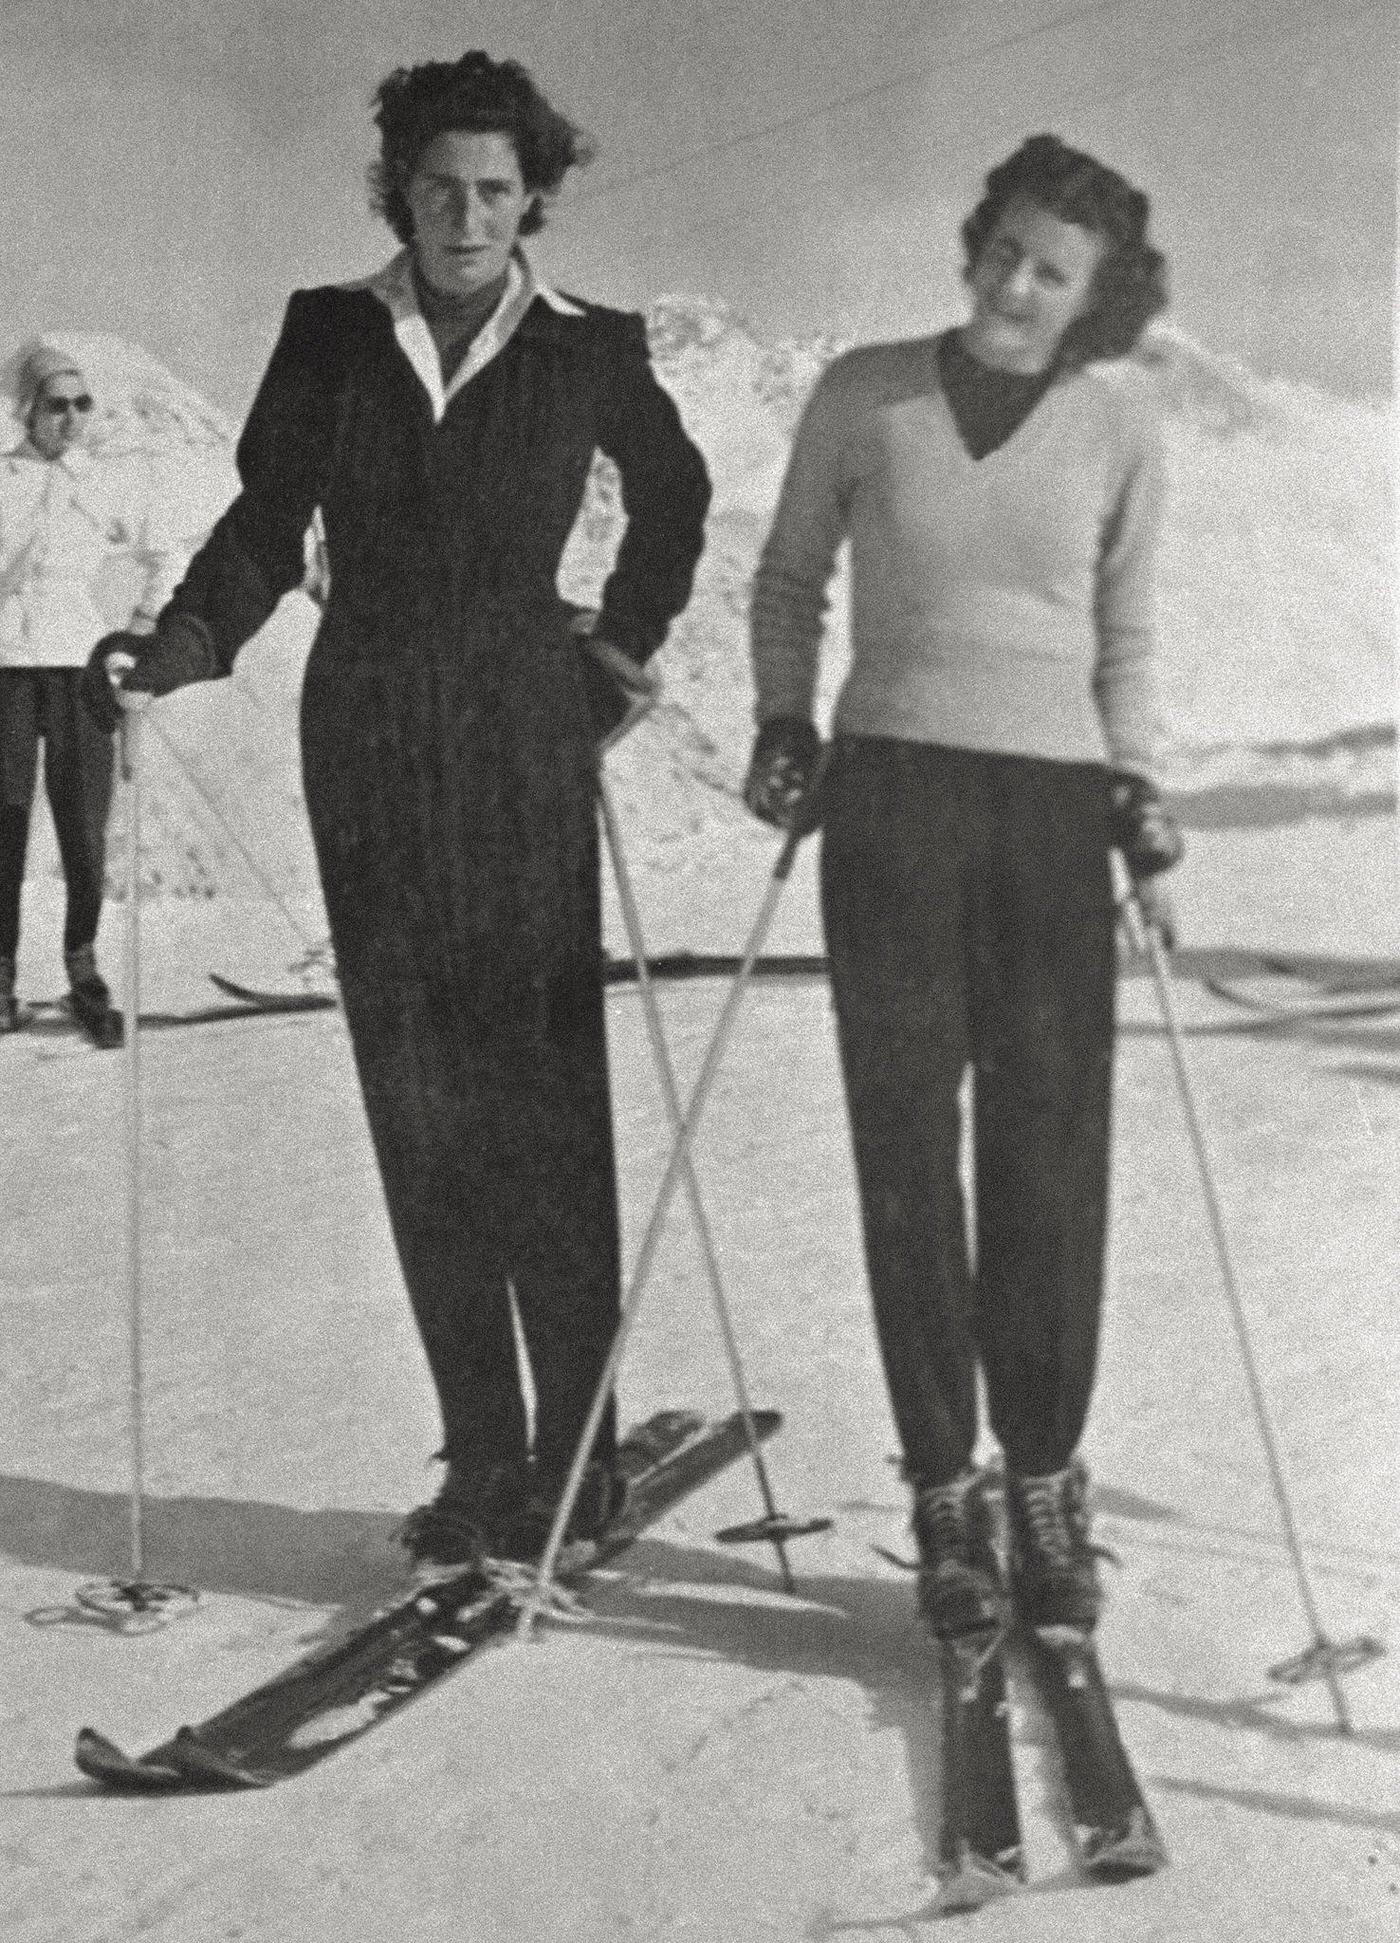 Susanna Agnelli herself on the skis, together with her youngher sister Cristina Agnelli